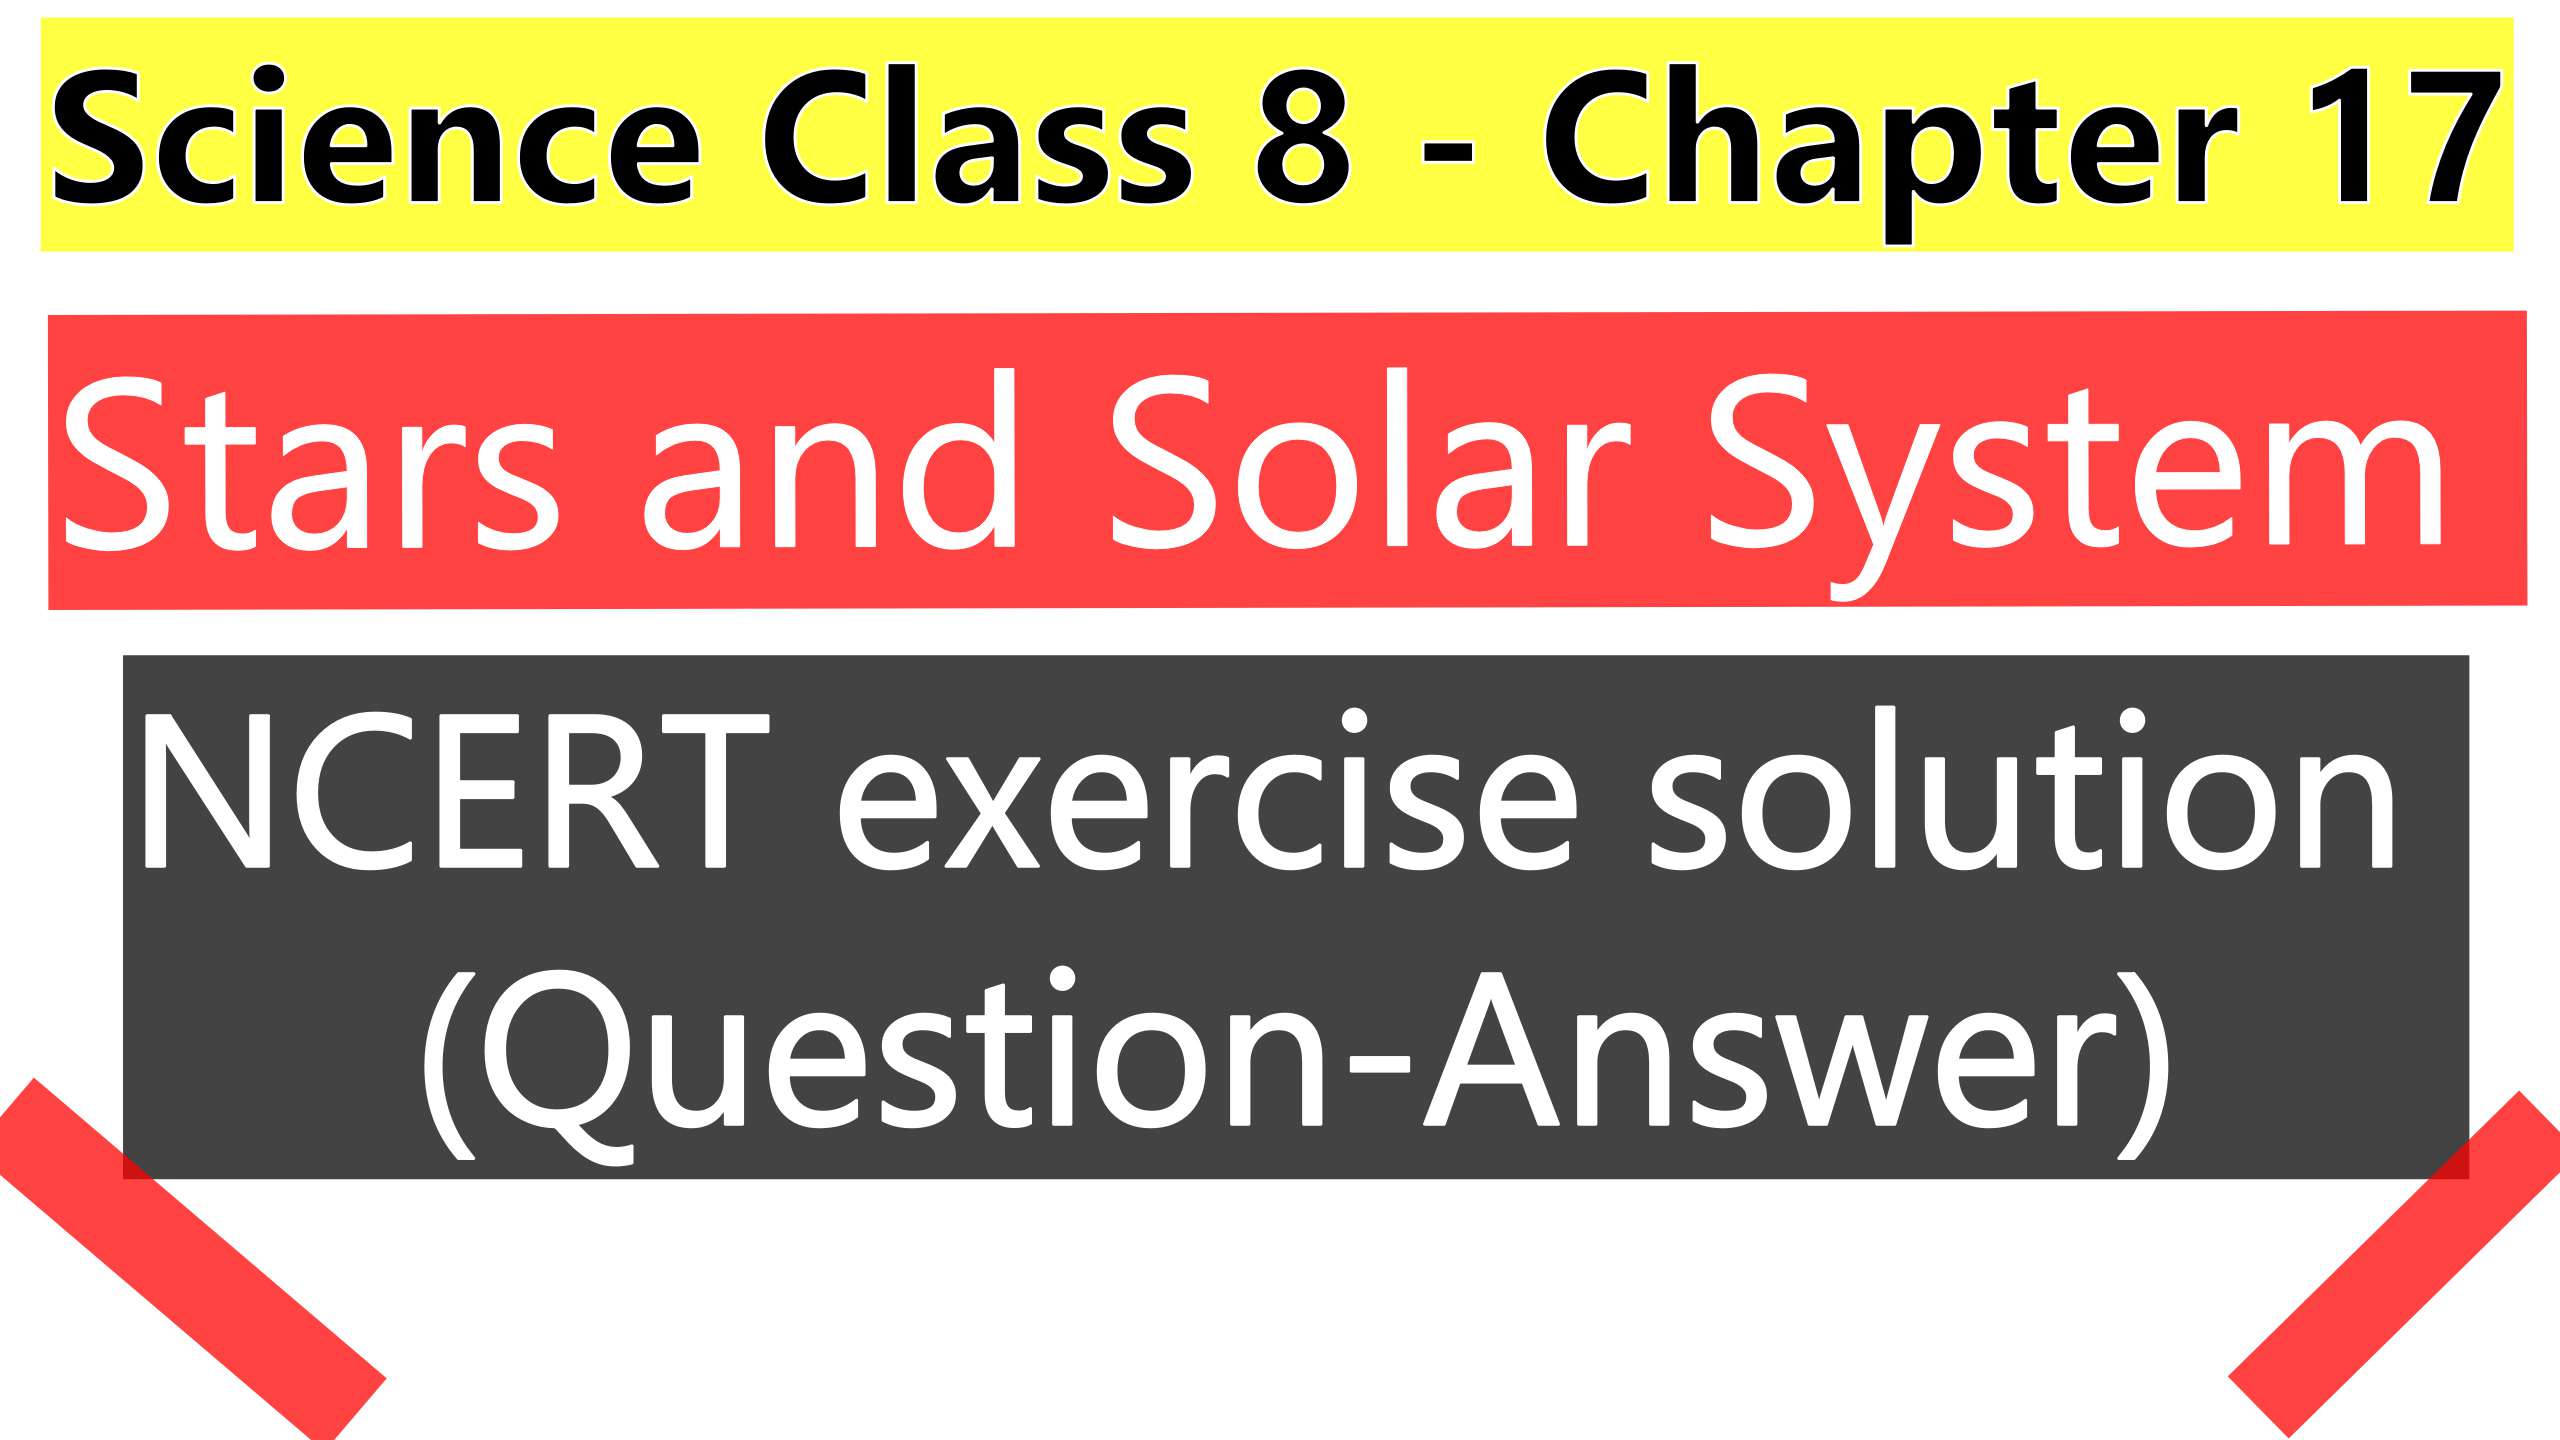 Science class 8- Chapter 17- Stars and Solar System-Ncert Exercise Solution